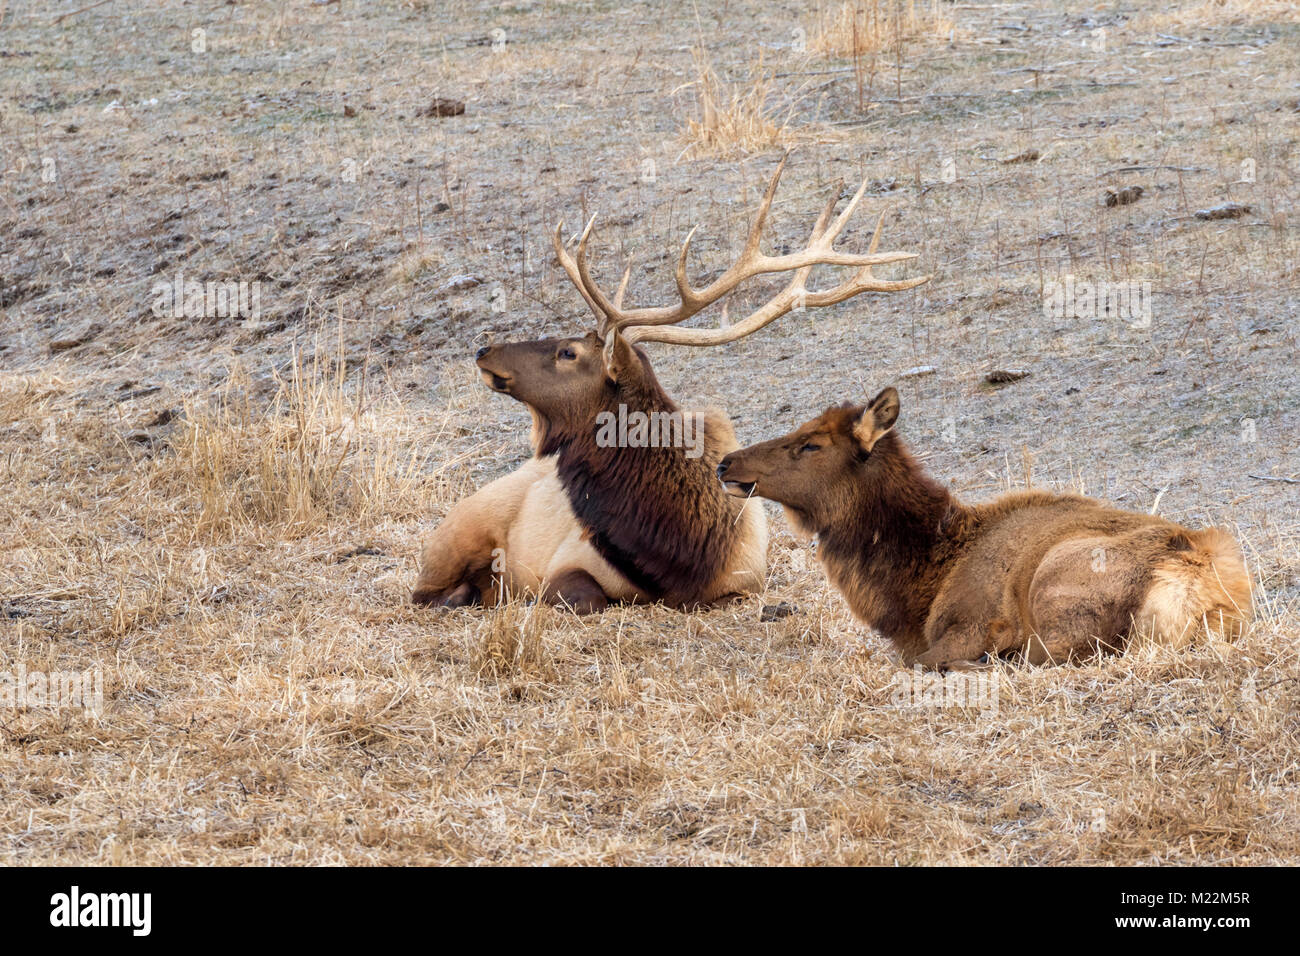 A couple of elk, or wapiti (Cervus canadensis) resting in prairie, Neal Smith National Wildlife Refuge, Iowa, USA. Stock Photo